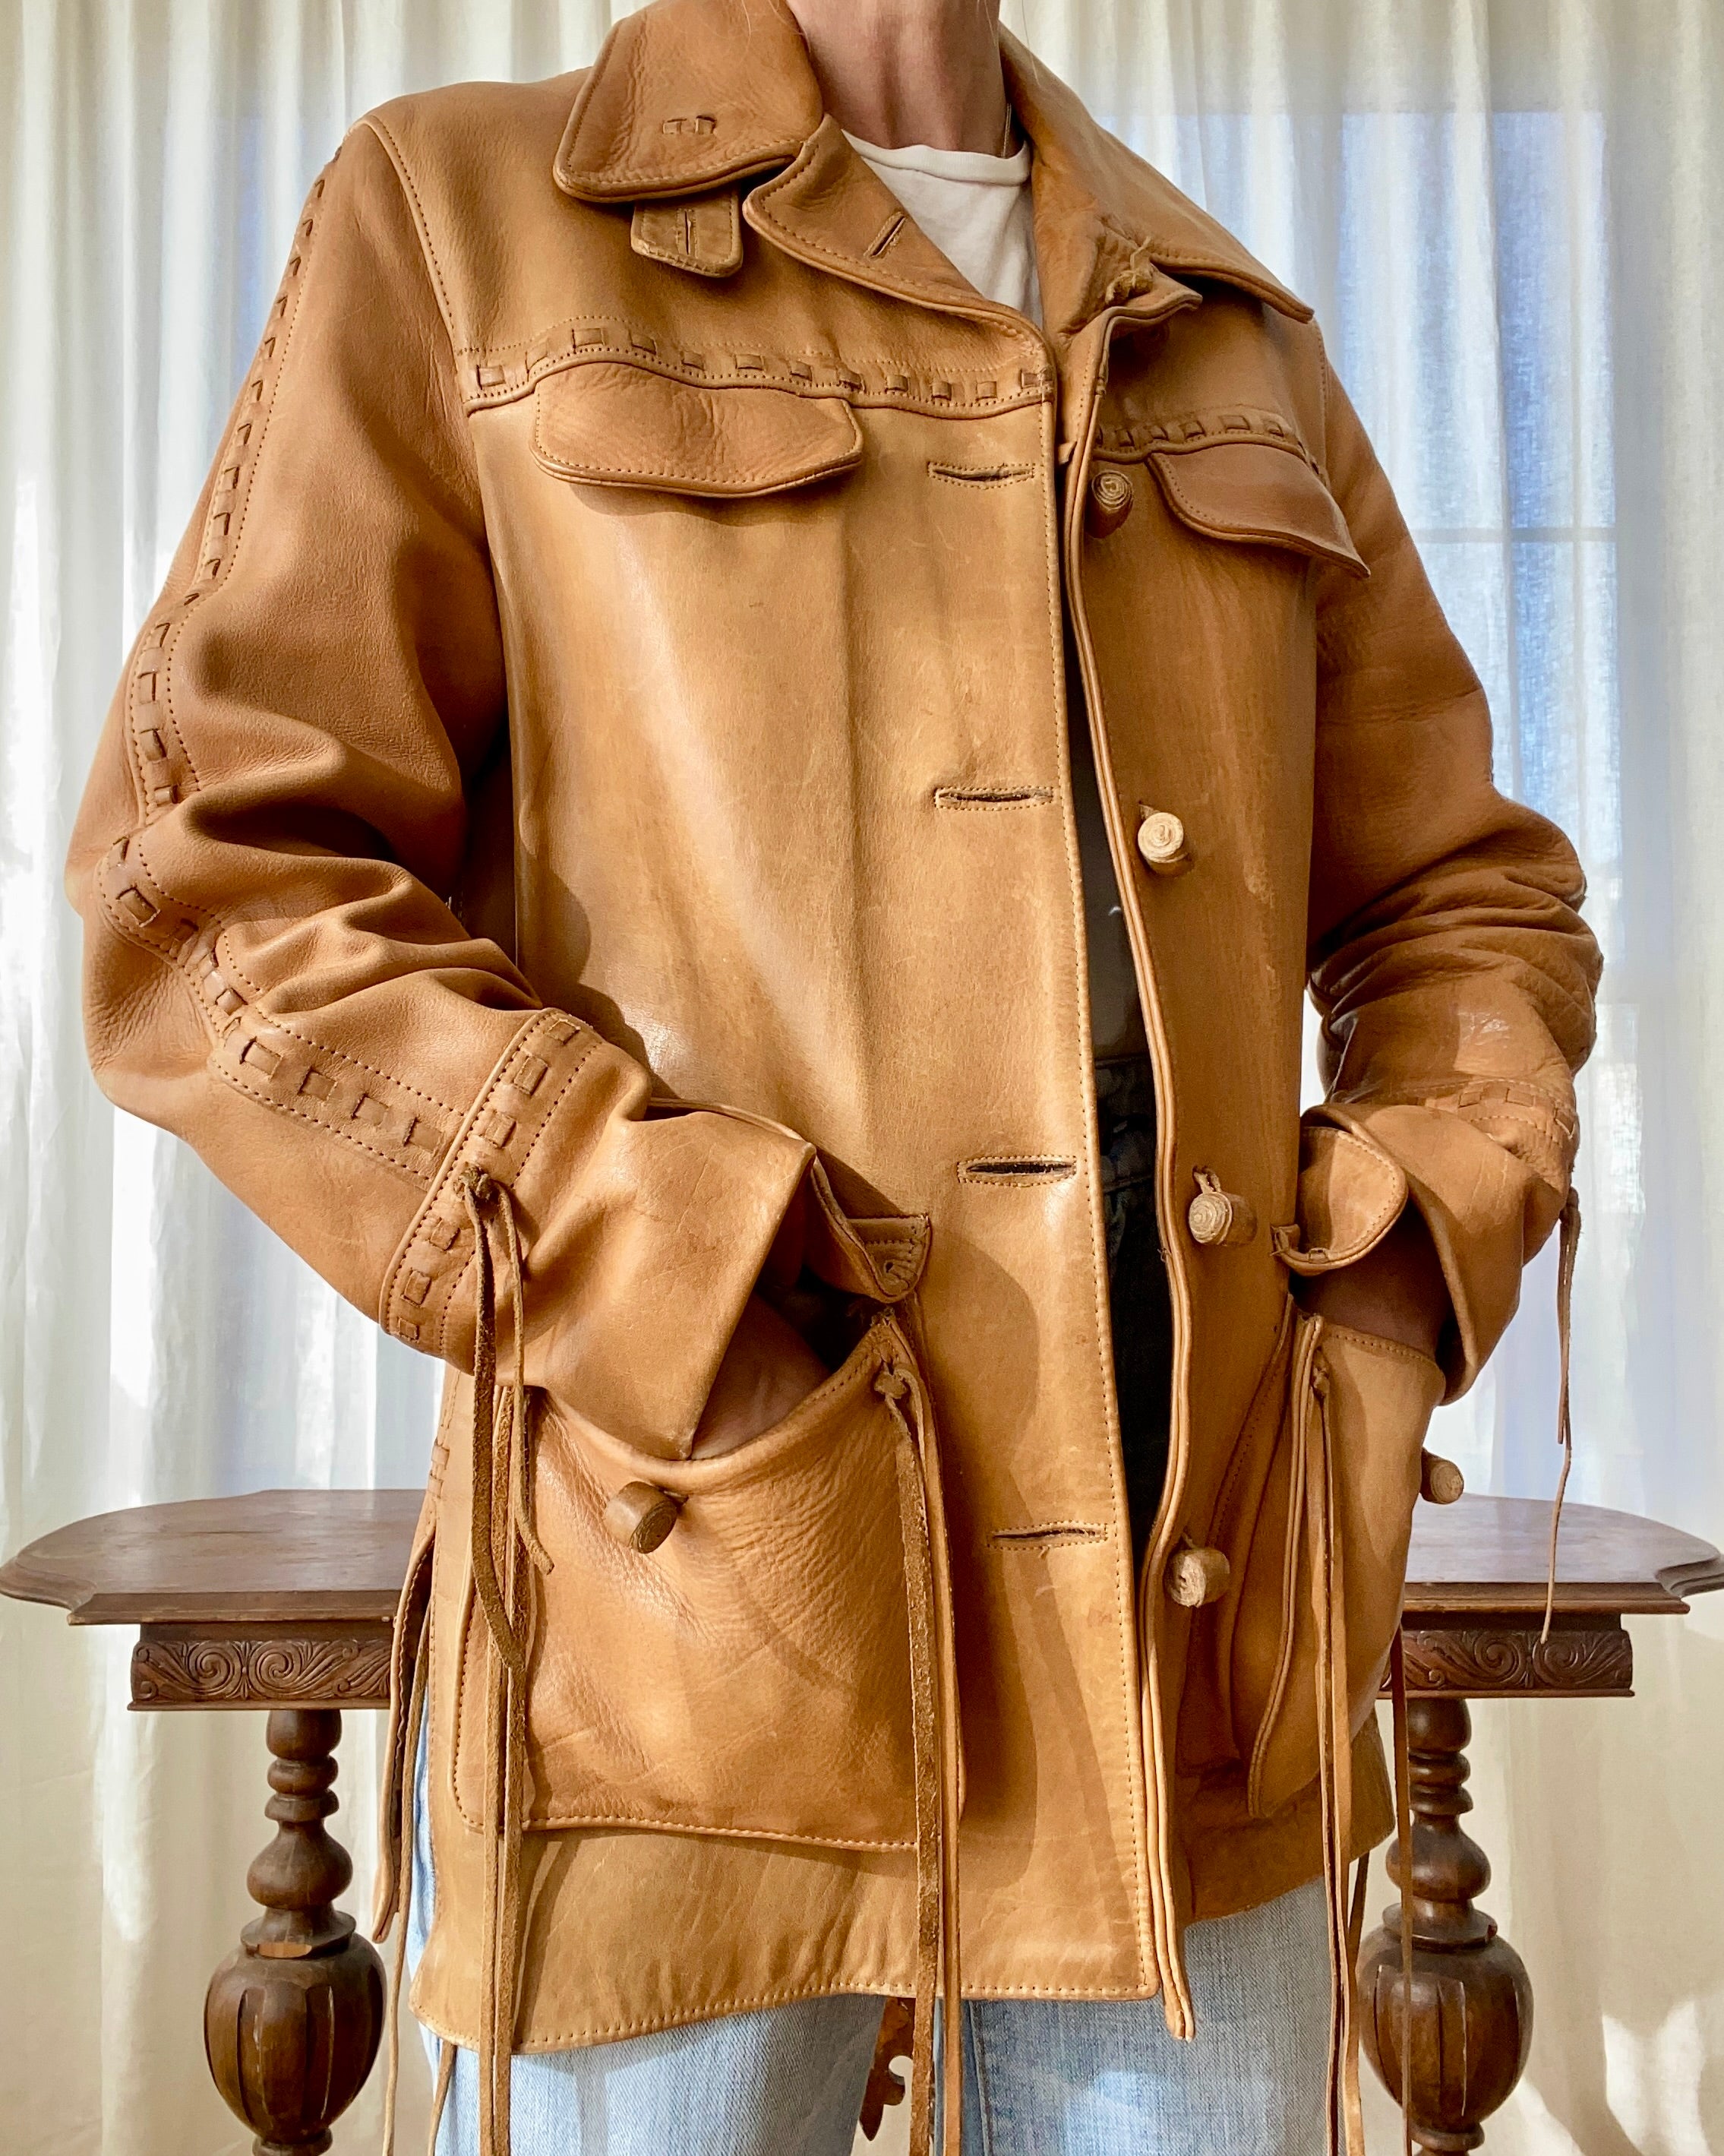 Vintage 1990s Pioneer Wear Leather Ranch Riding Coat Jacket